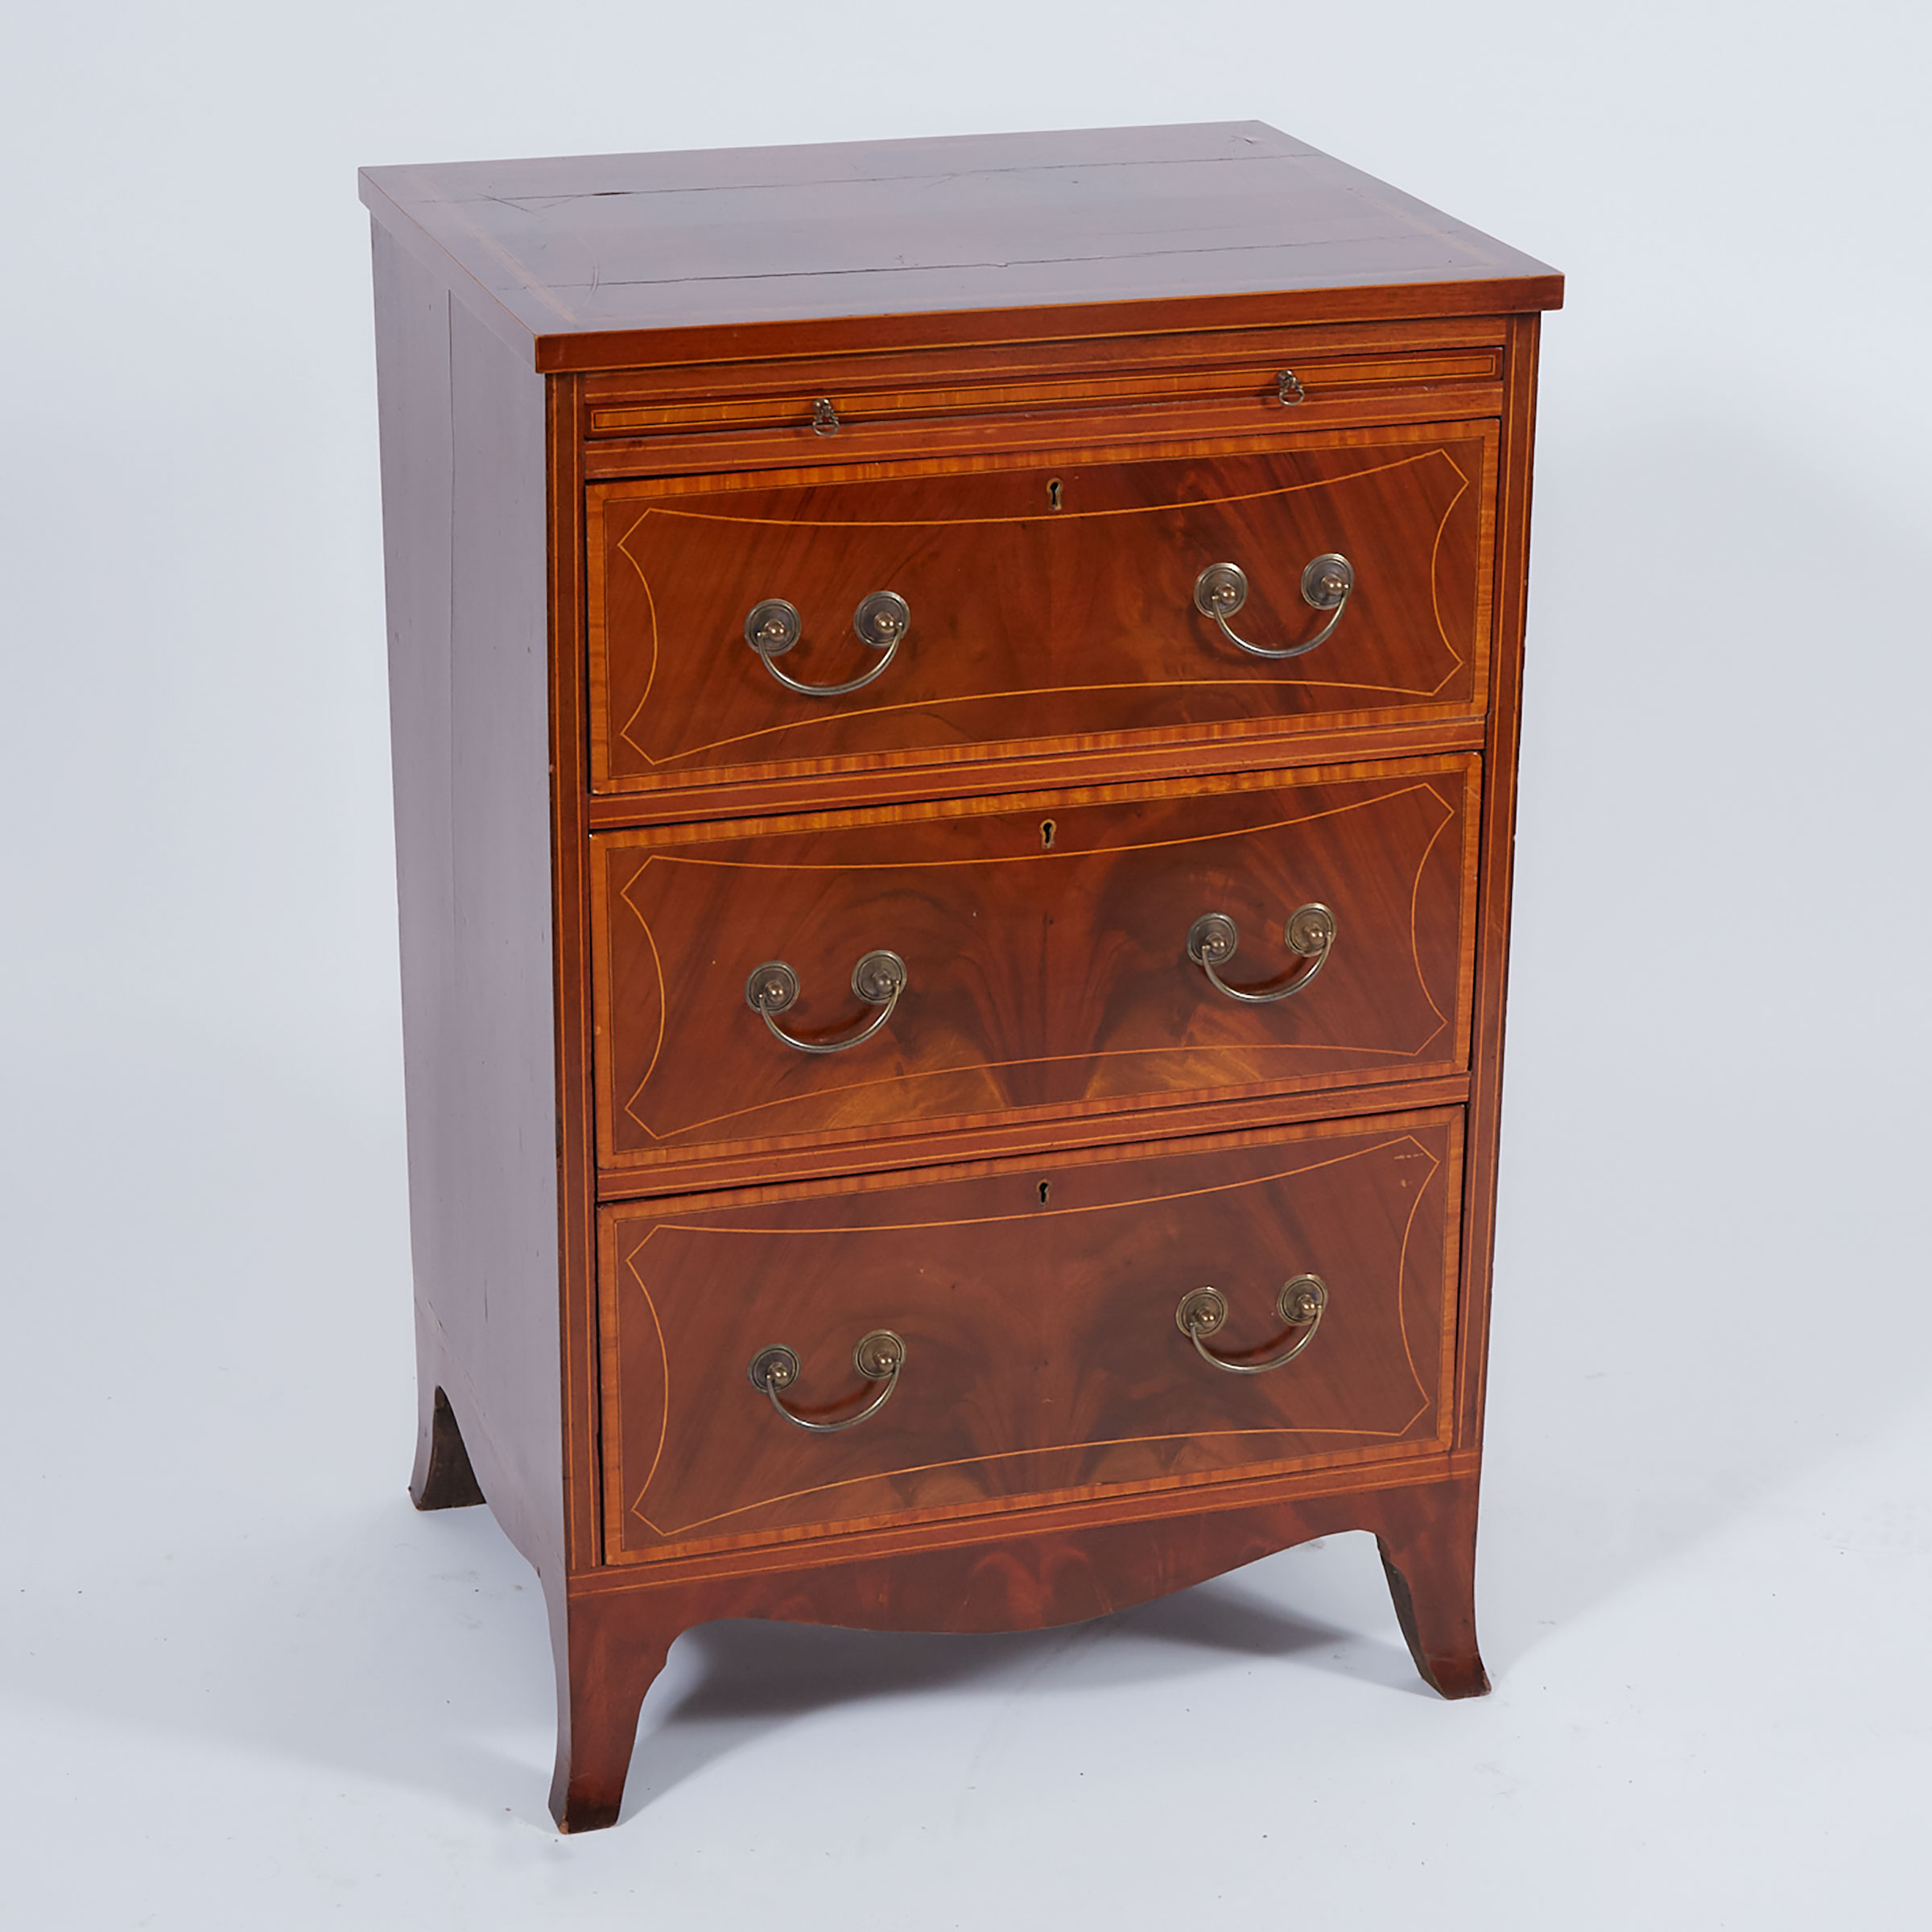 Regency Satinwood Strung Flame Mahogany Bachelor’s Chest, 19th century